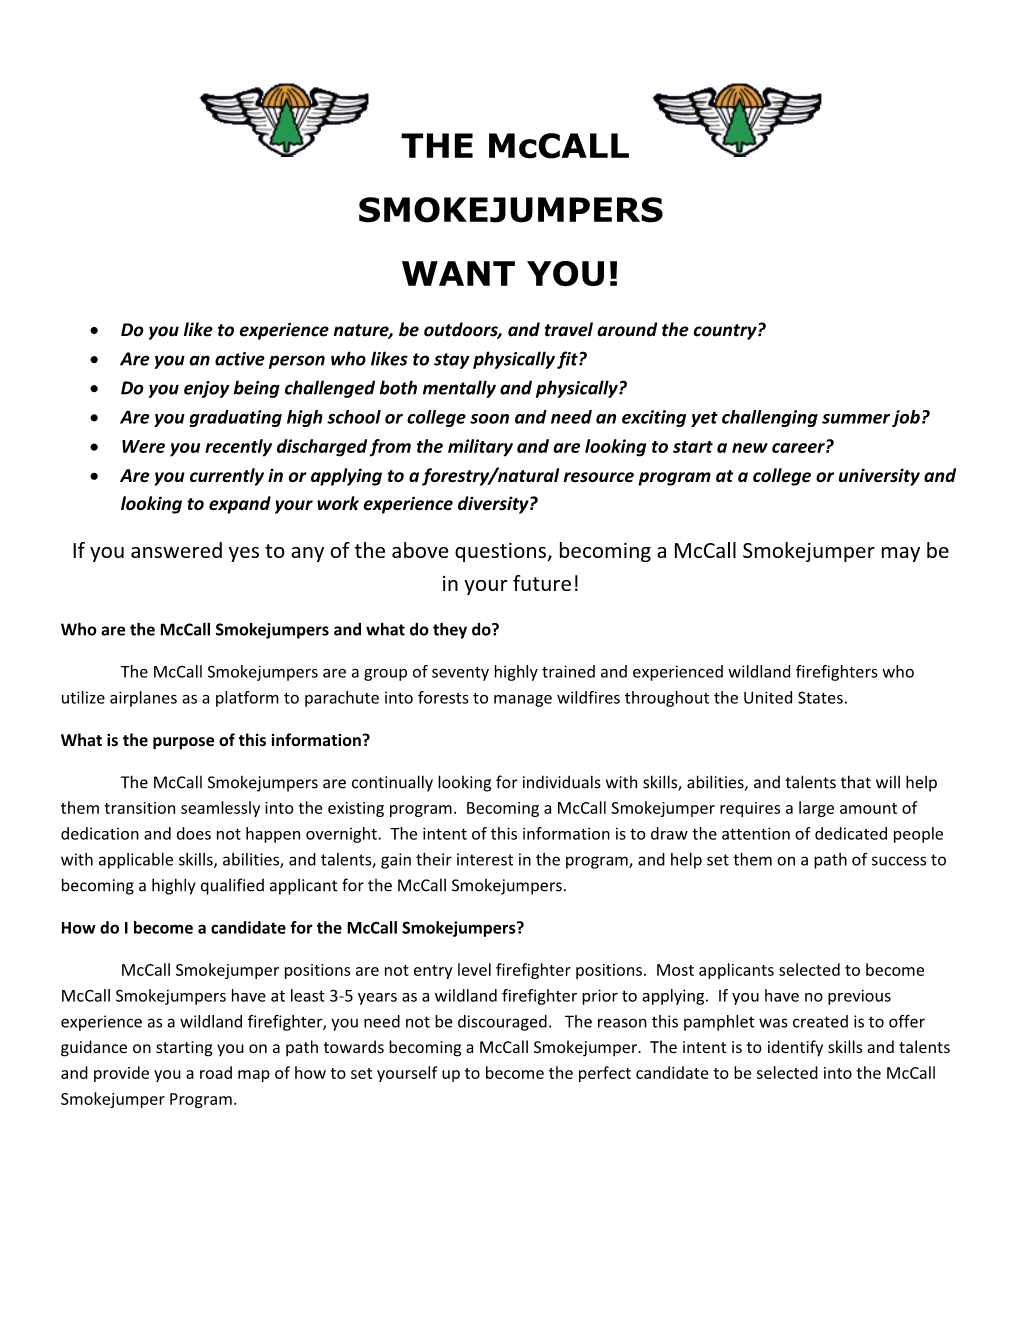 THE Mccall SMOKEJUMPERS WANT YOU!